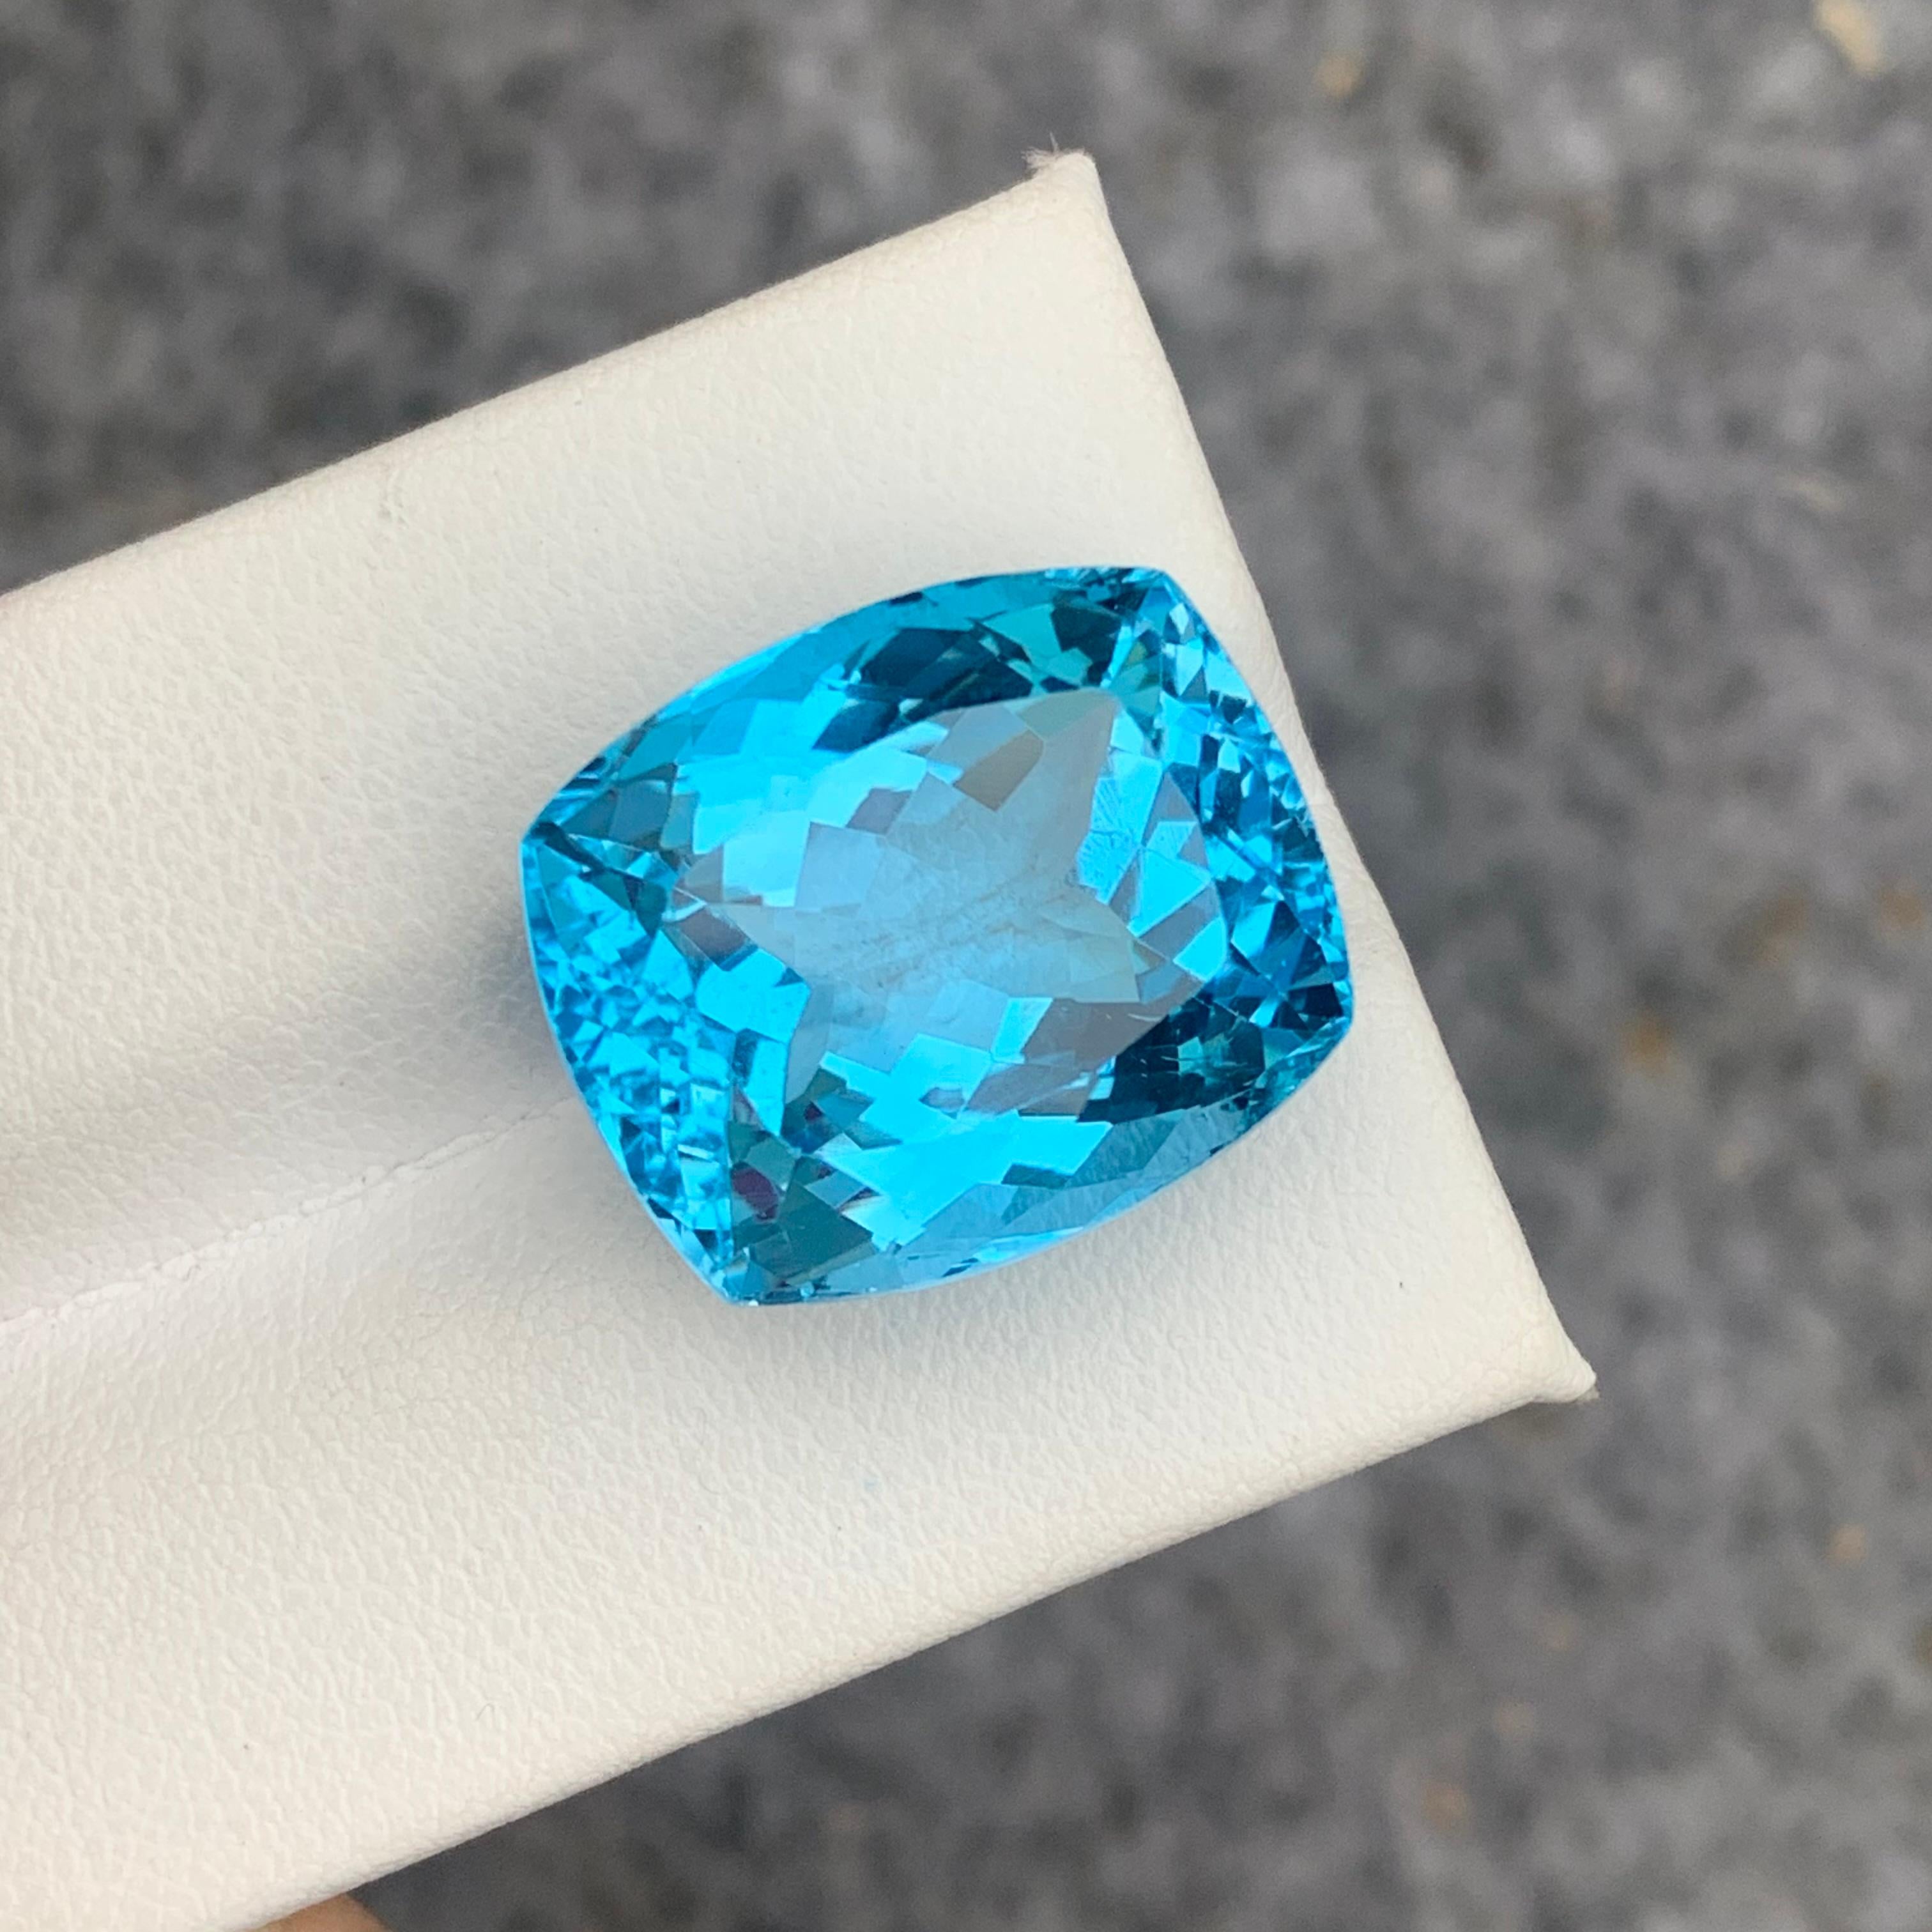 Faceted Sky Blue Topaz 
Weight : 31.10 Carats
Dimensions : 18.9x16x11.6 Mm
Origin : Brazil
Clarity : Eye Clean
Shape: Cushion
Cut/Facet: Cushion 
Color: Blue
Certificate: On Demand
Blue Topaz Metaphysical Properties
Blue topaz, in particular, is